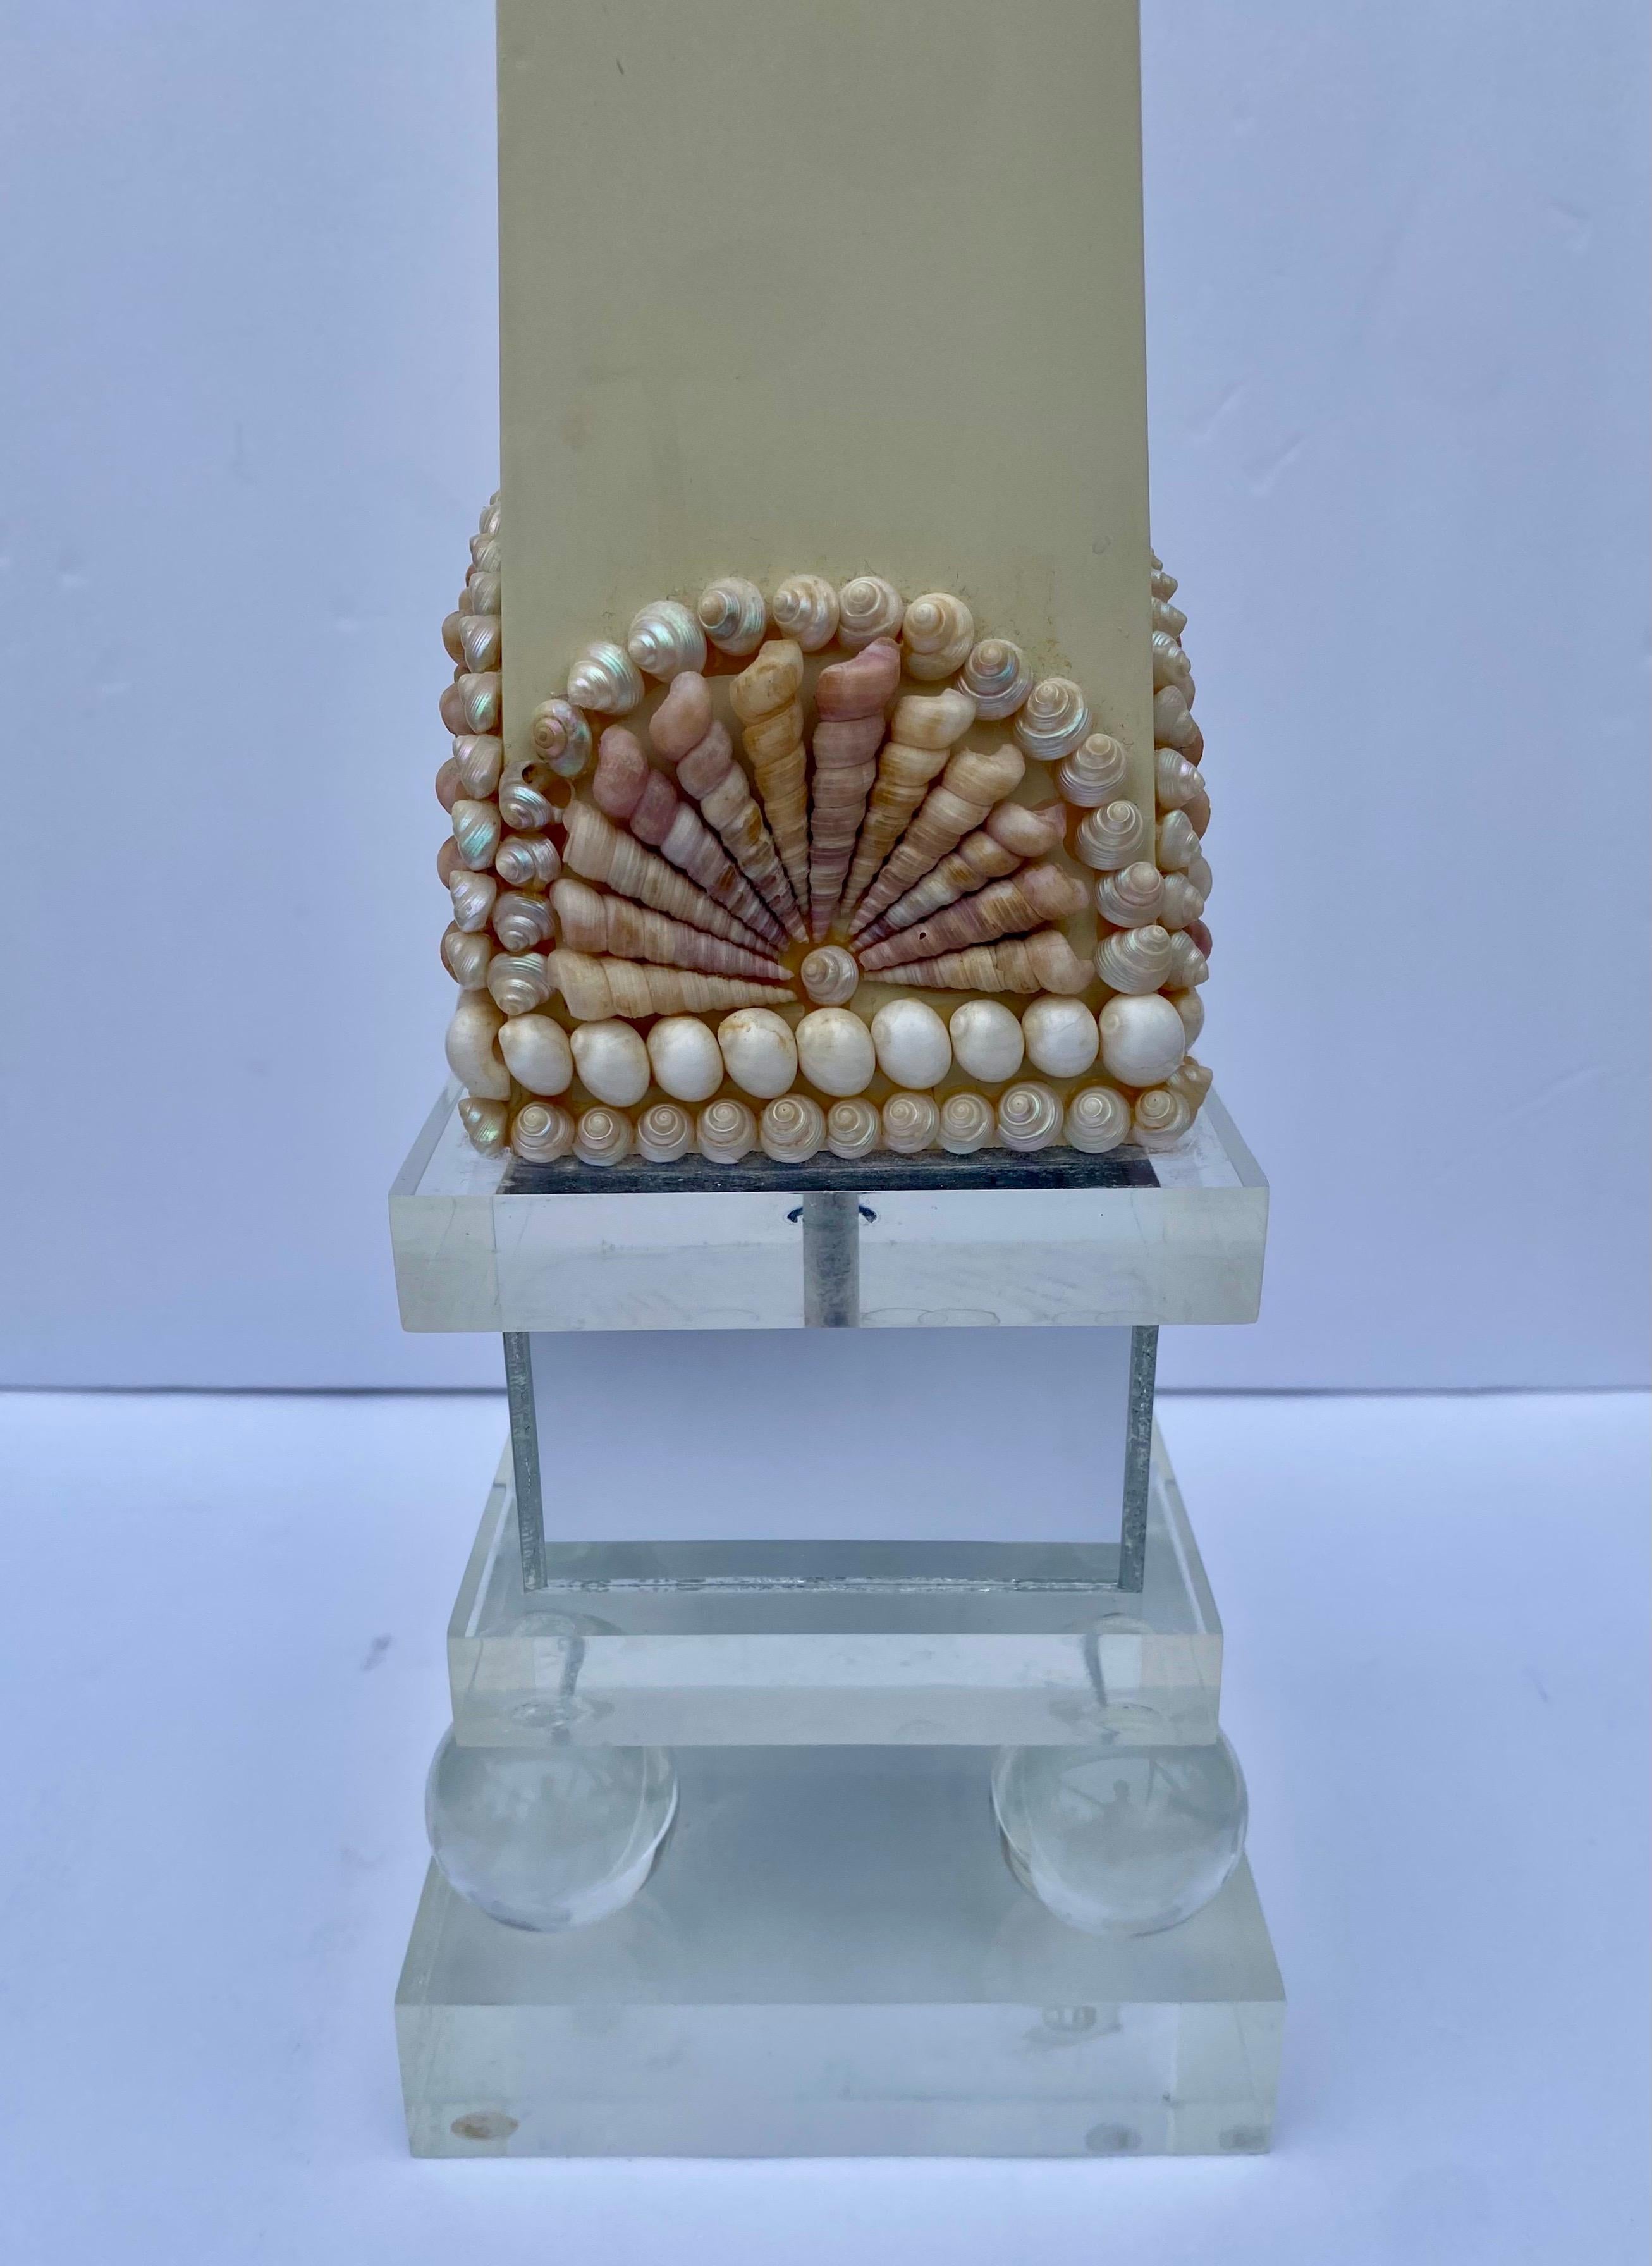 Post Modern 1980s Lucite Shell Seashell Mirror Lacquer Obelisk Table Sculpture For Sale 3